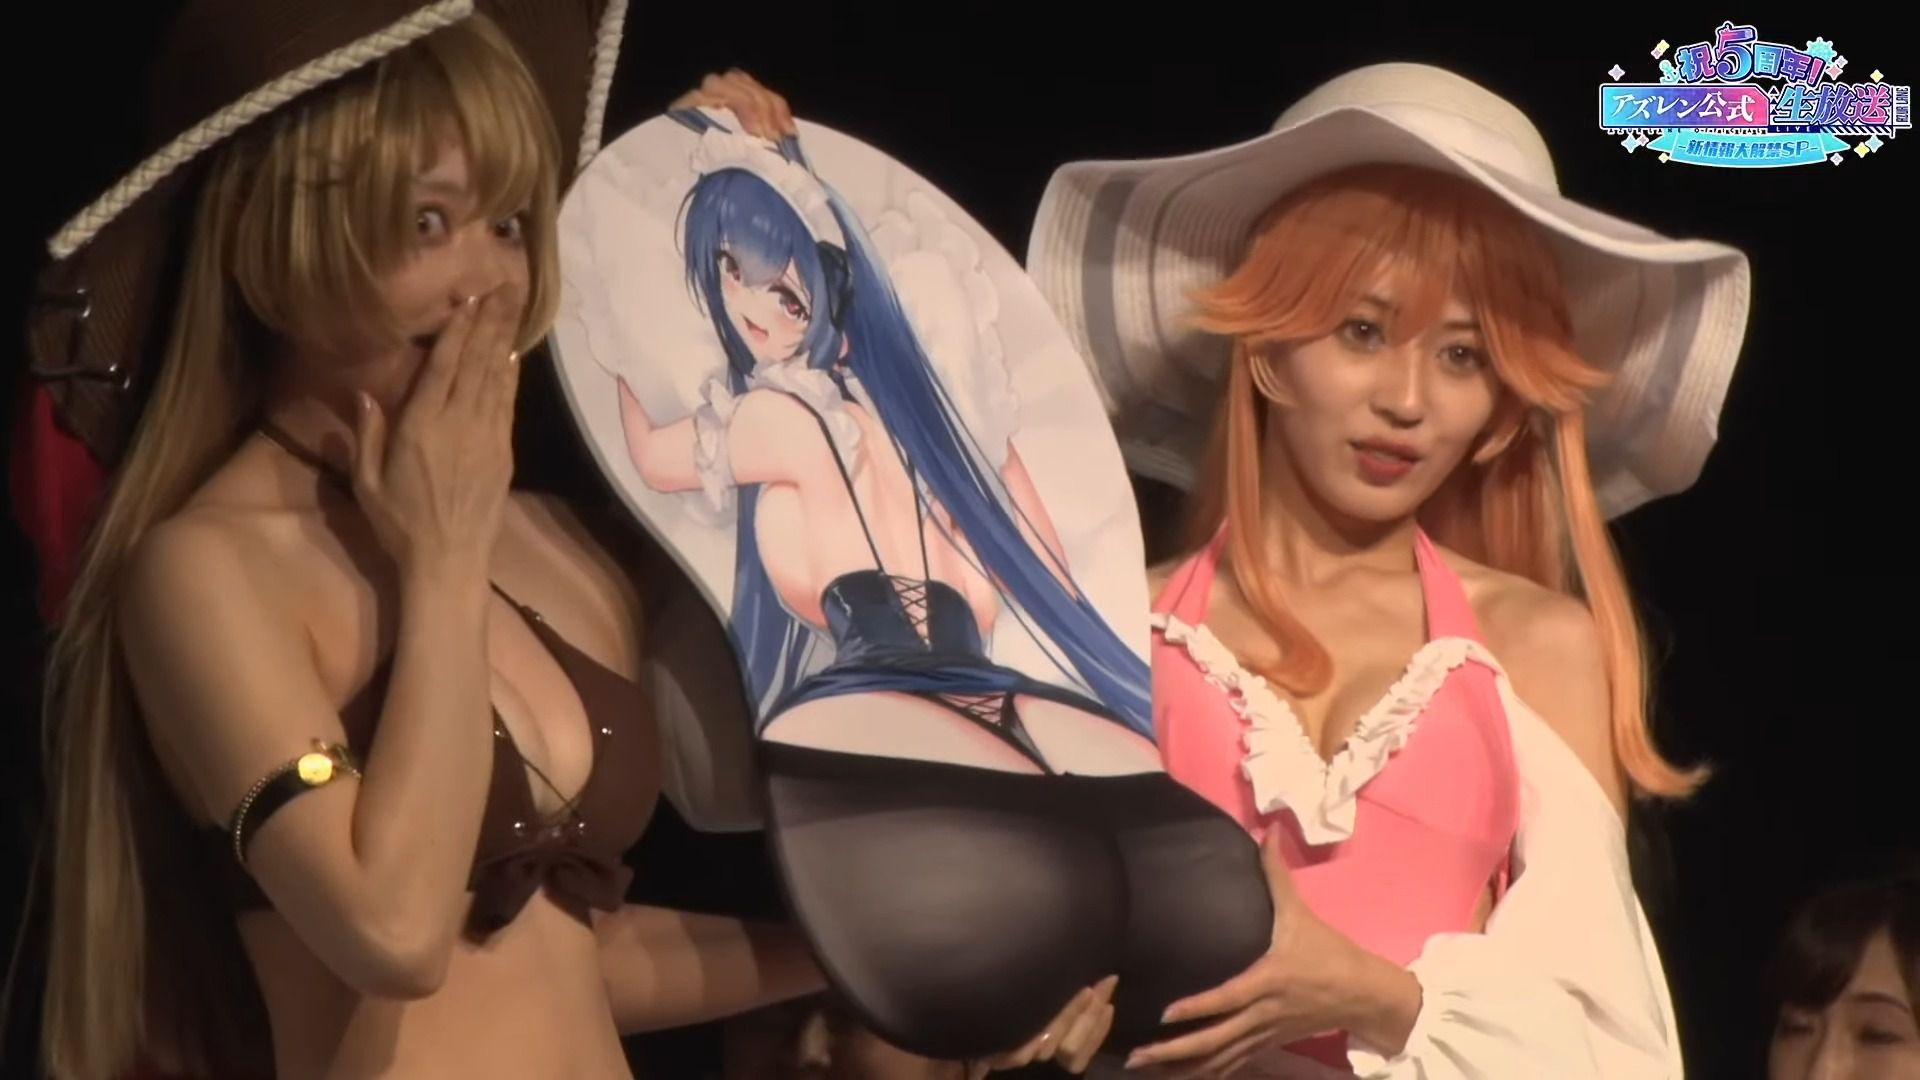 "Azure Lane" Introducing erotic goods such as rubbing the Dosquebe giant butt mouse pad made to wear tights 13